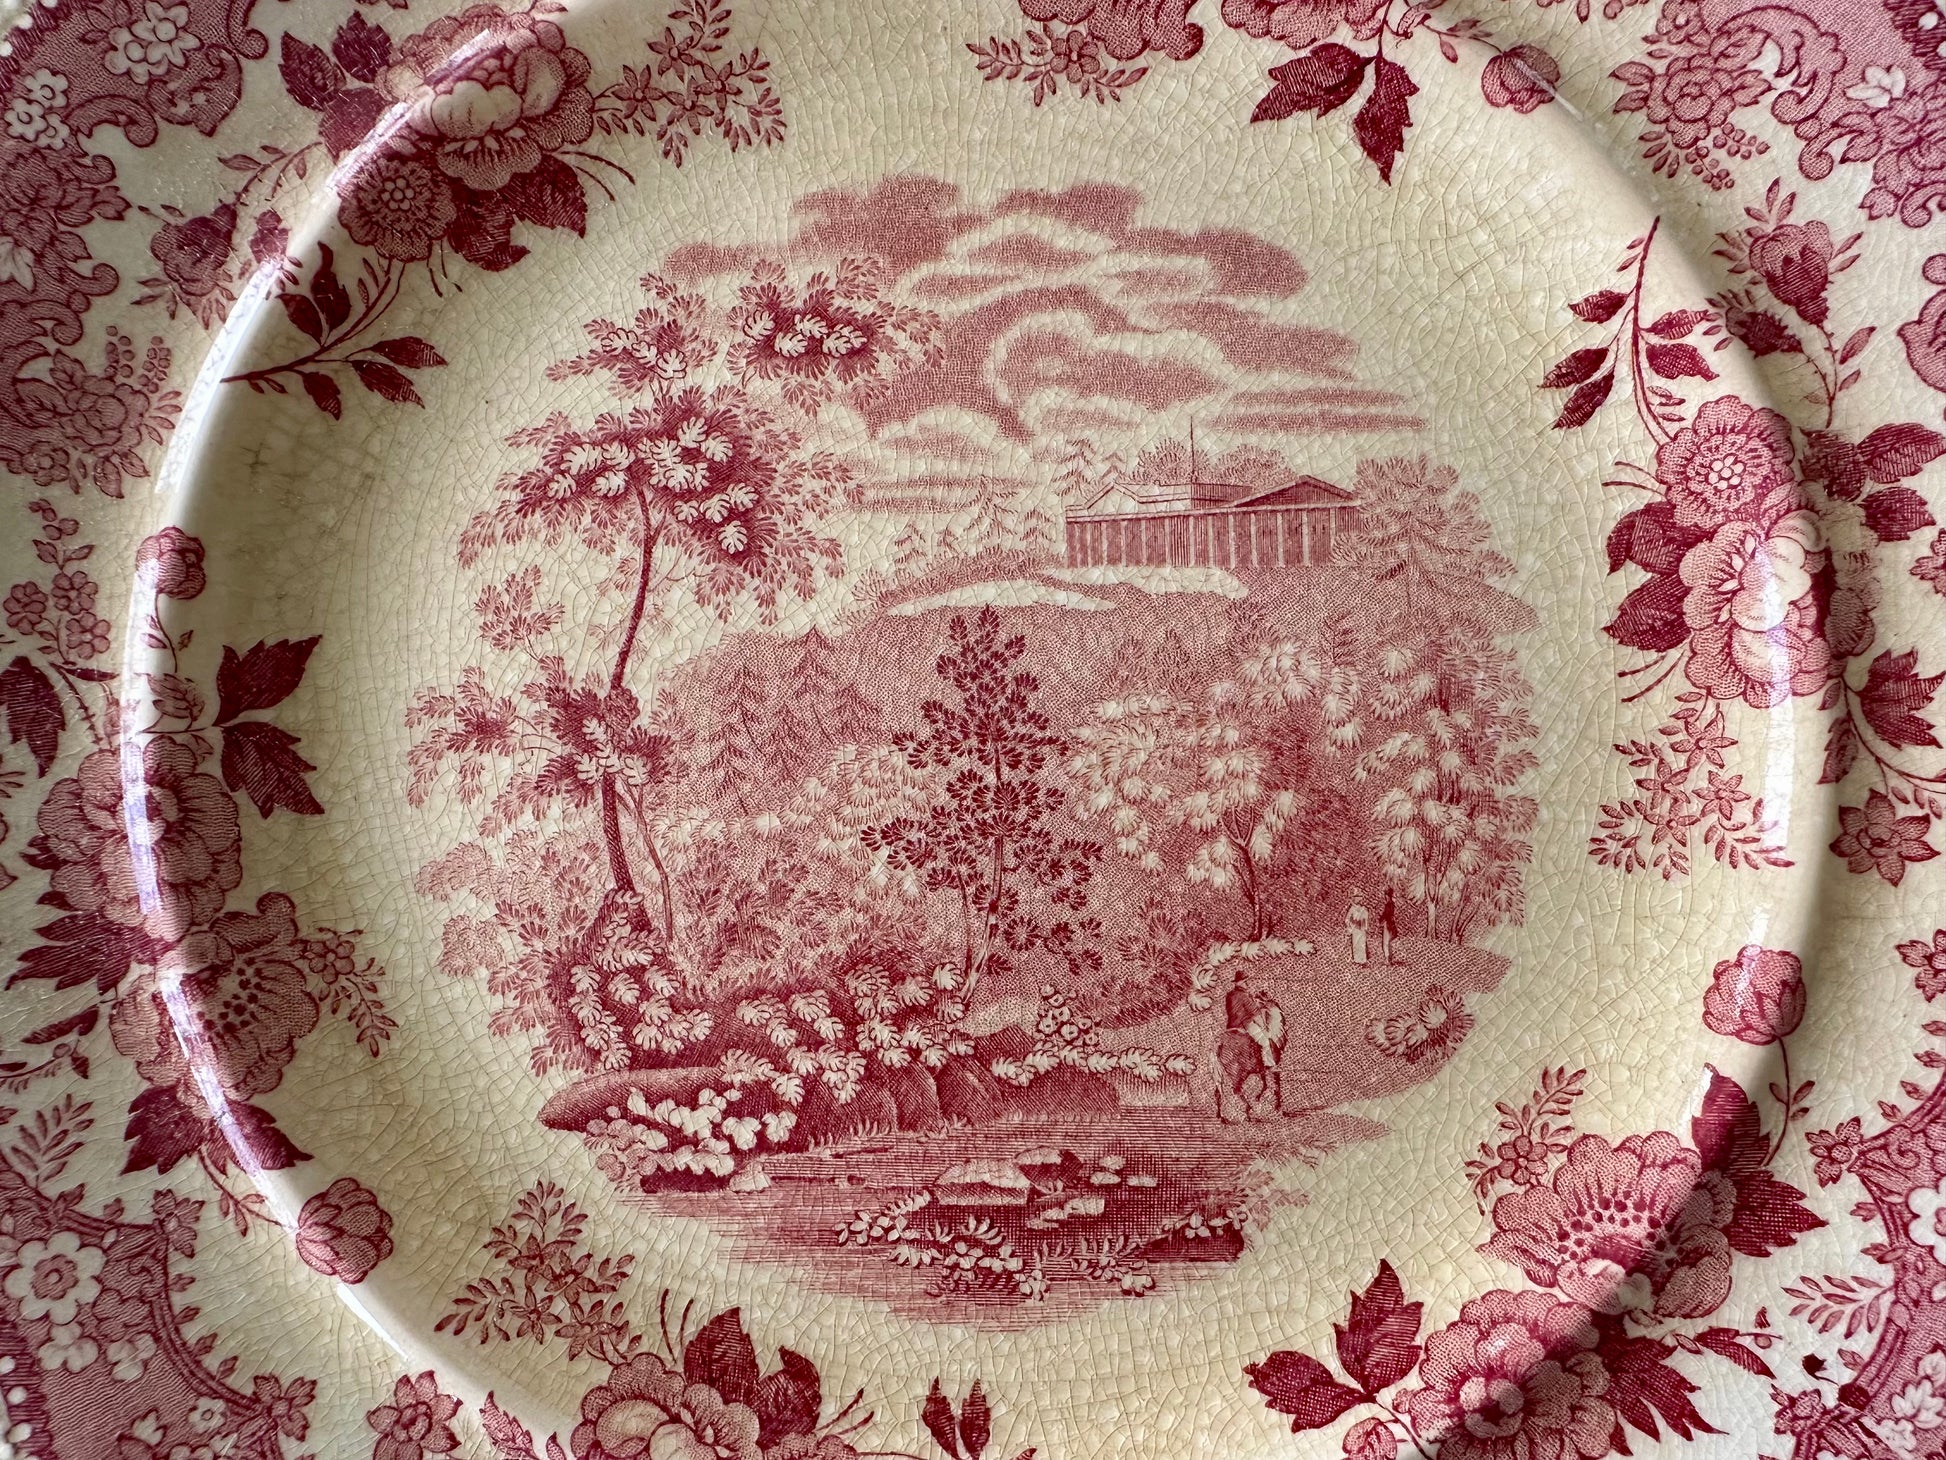 Set of 5 antique red and white transferware dinner plates made by William Ridgway in 1830's - DharBazaar